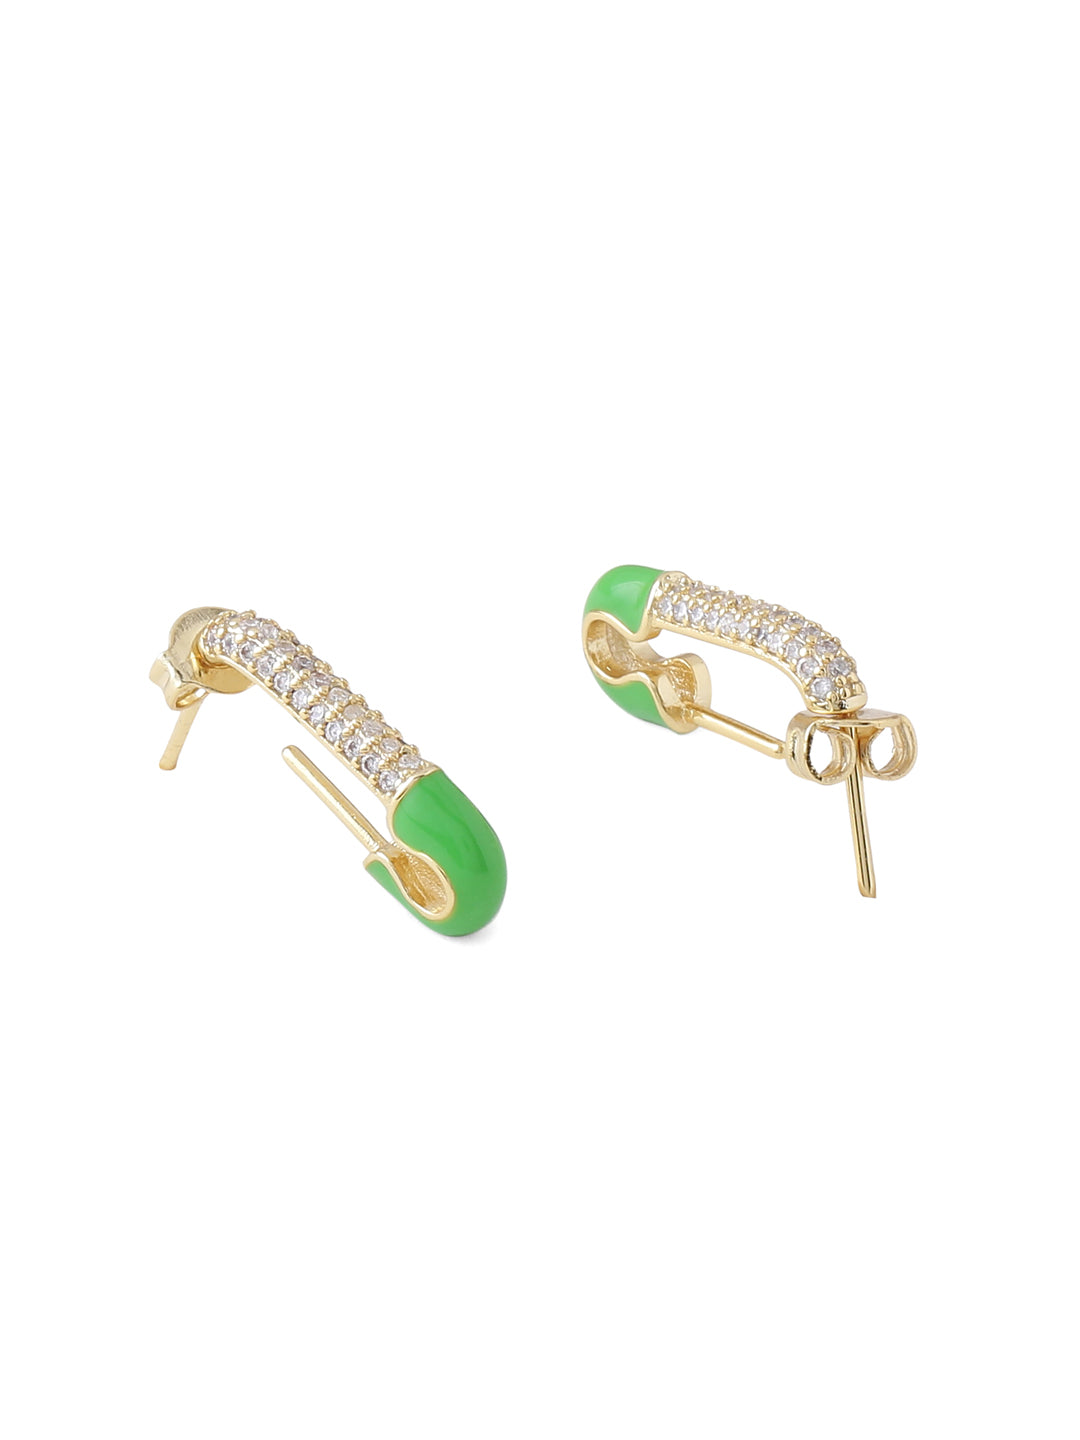 Buy Gold Plated Stones Embellished Safety Pin Earrings by Anushka Jain  Jewellery Online at Aza Fashions.